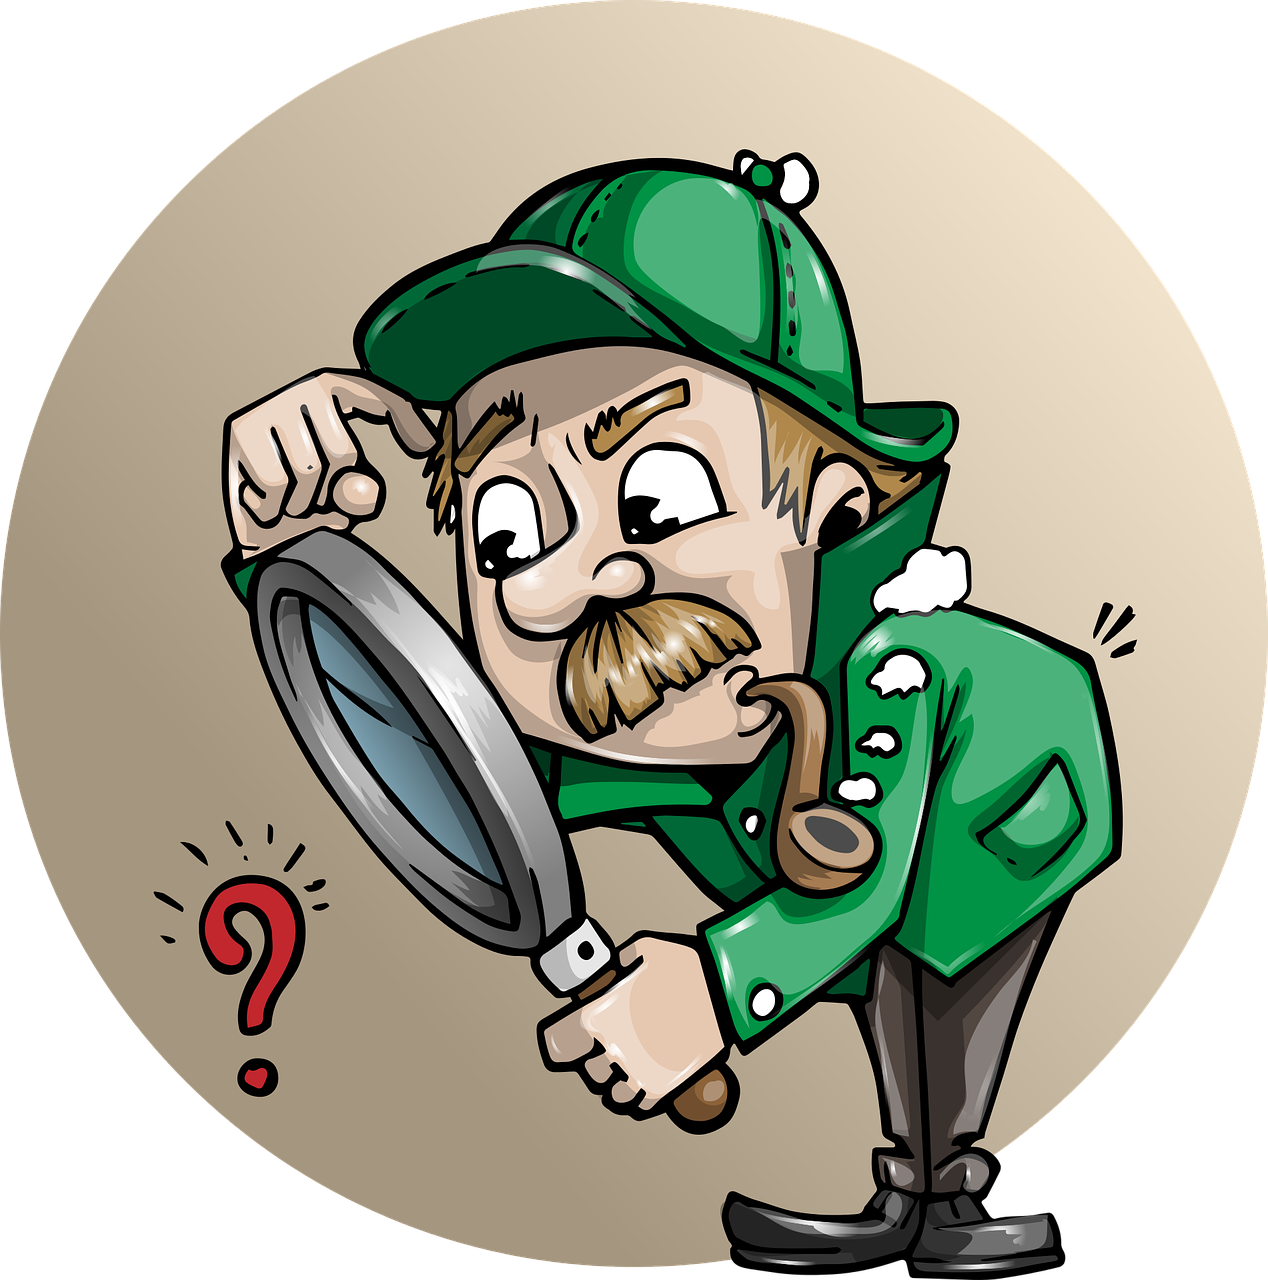 Cartoon of Sherlock Holmes with magnifying glass looking at red question mark. Shows how a real estate broker has connections to home inspectors so they can check for any pot or cannabis related damage.